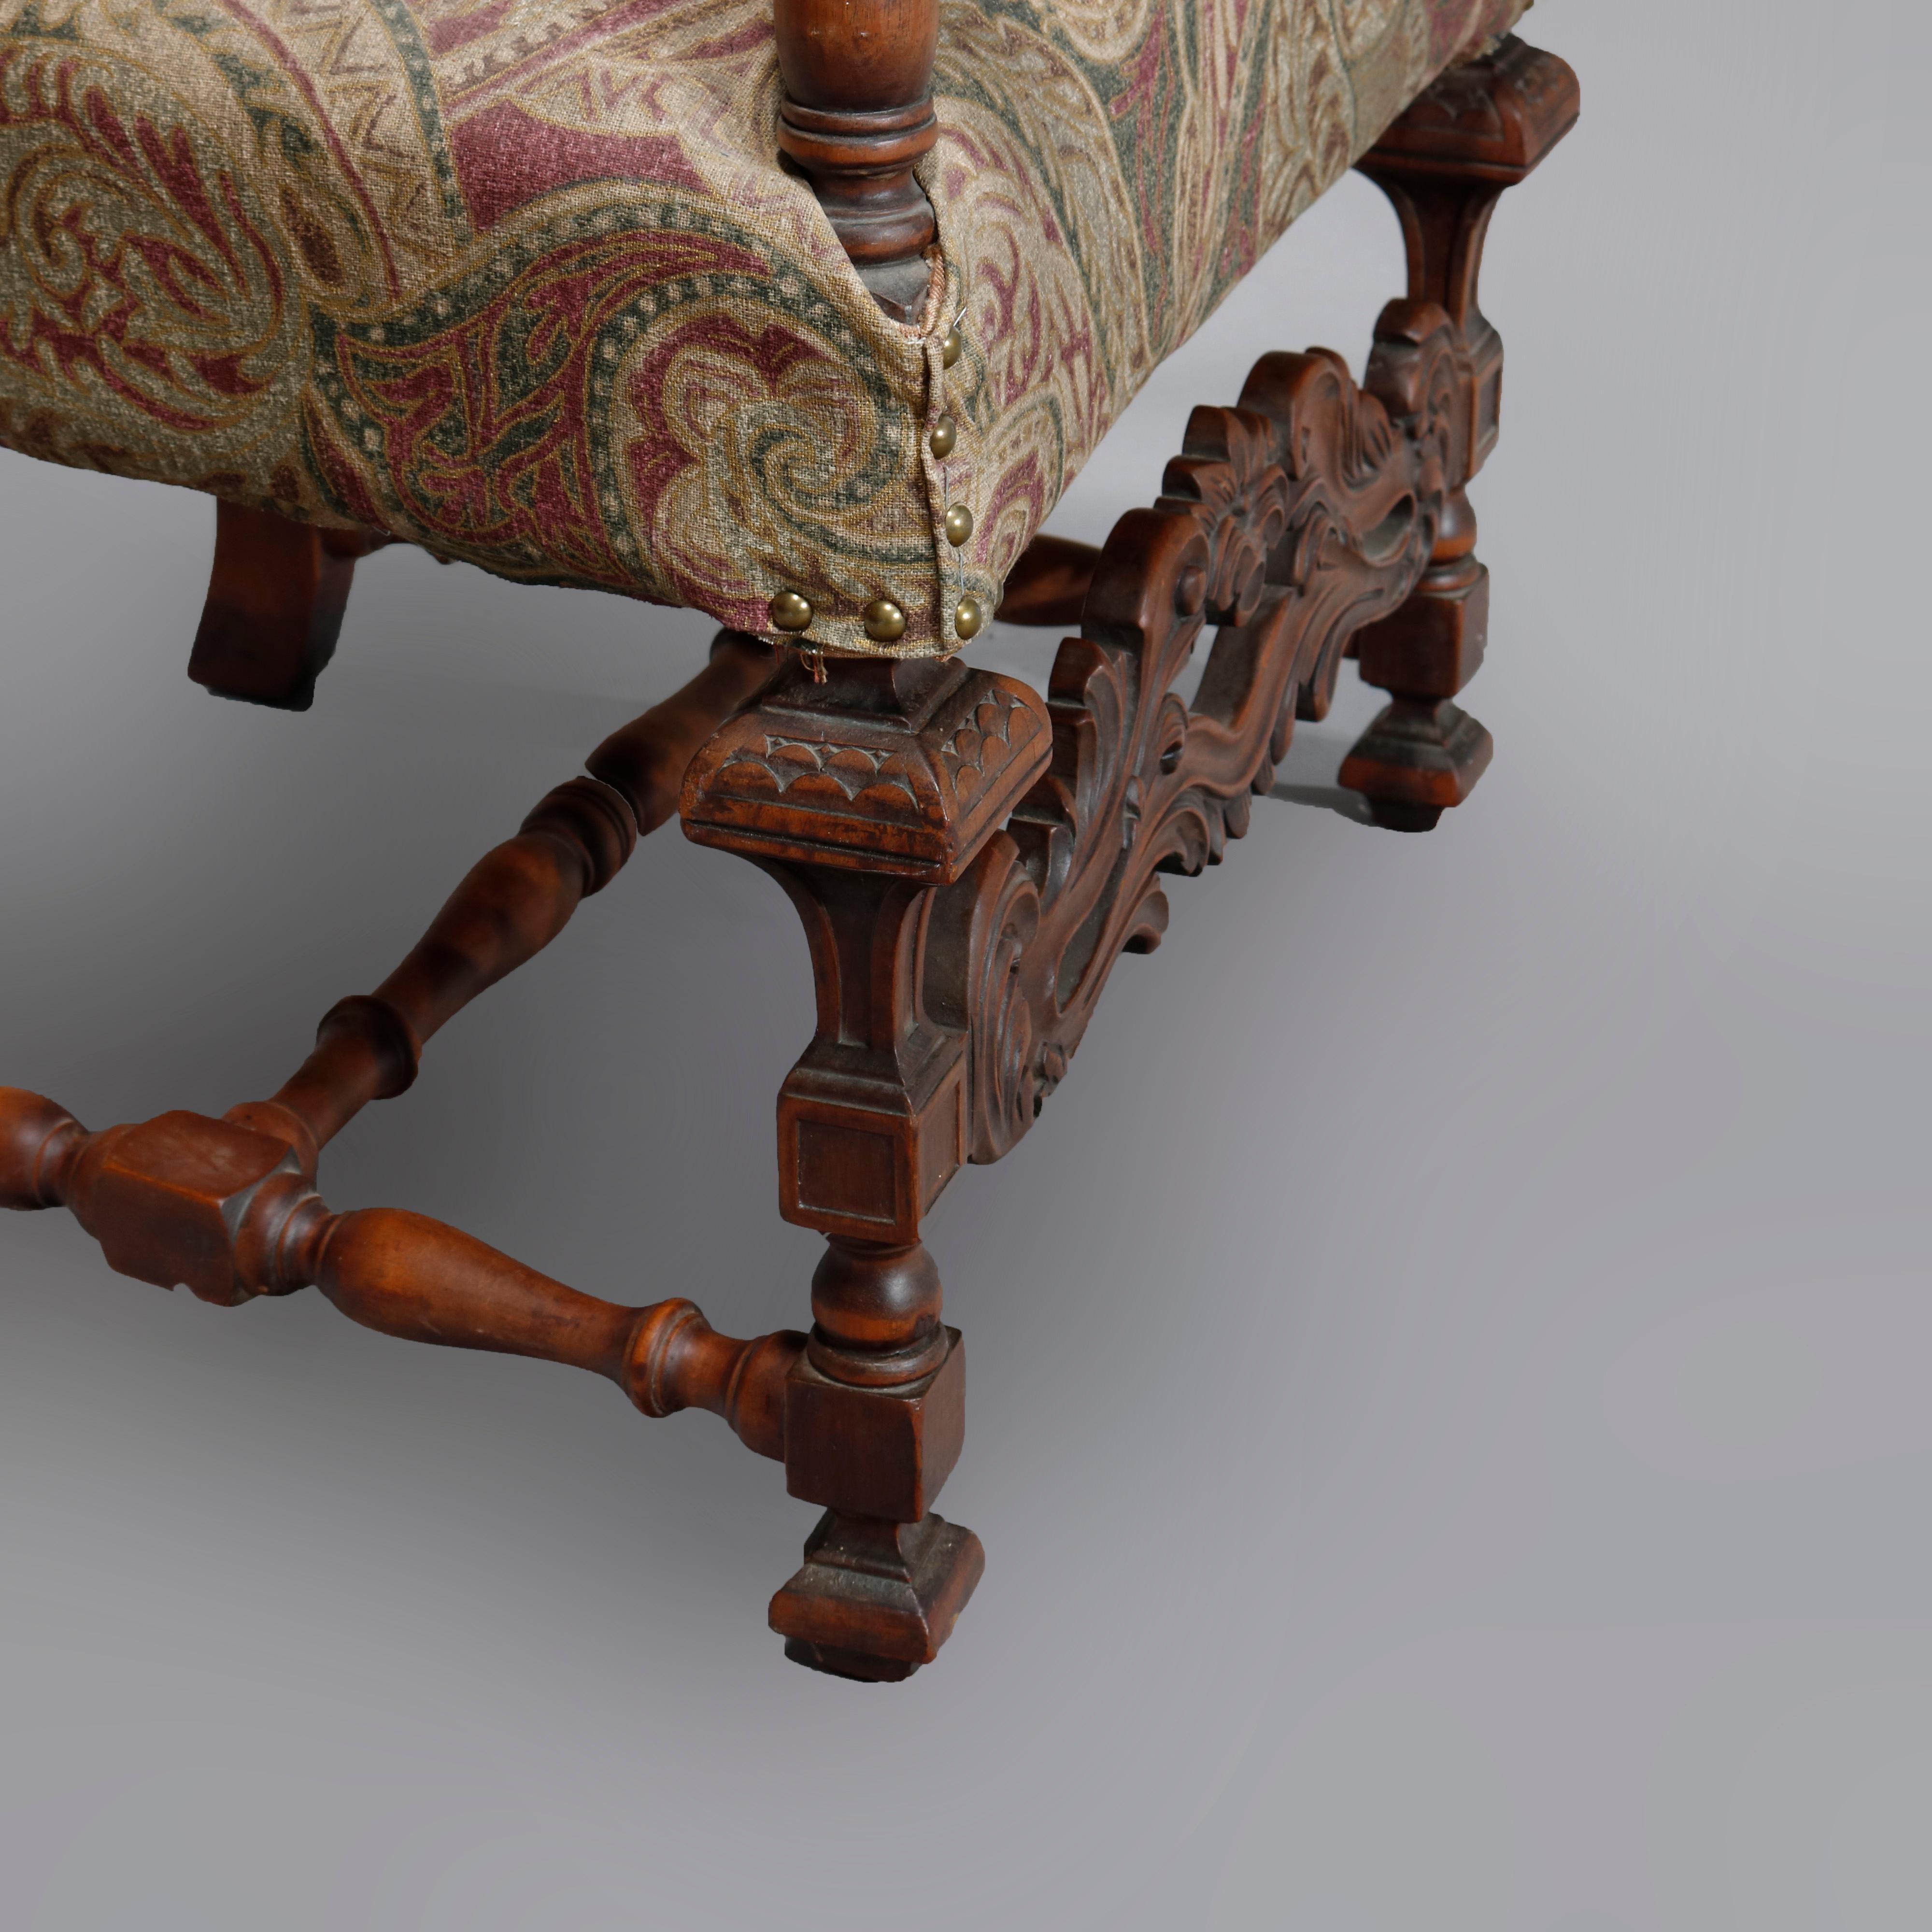 Antique Italian Renaissance Revival Style Carved Walnut Throne Chair, circa 1900 For Sale 2